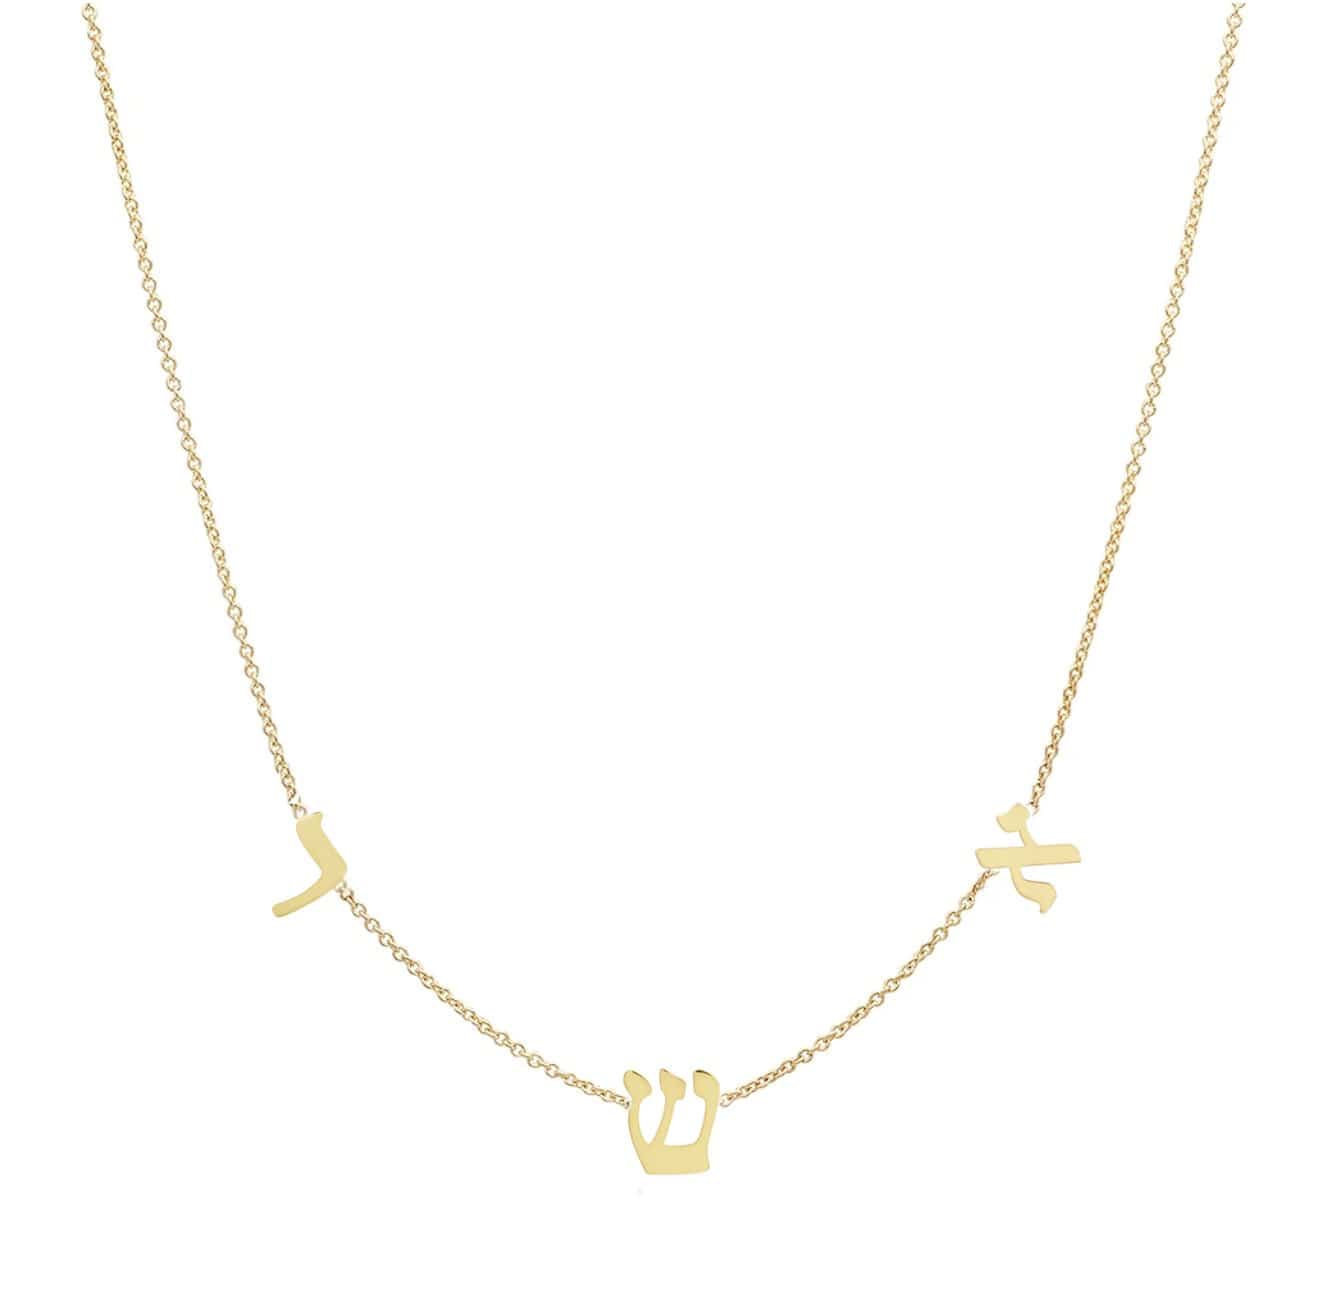 Taly Hebrew Initial Necklace - Sterling Silver or Gold Vermeil (Up to